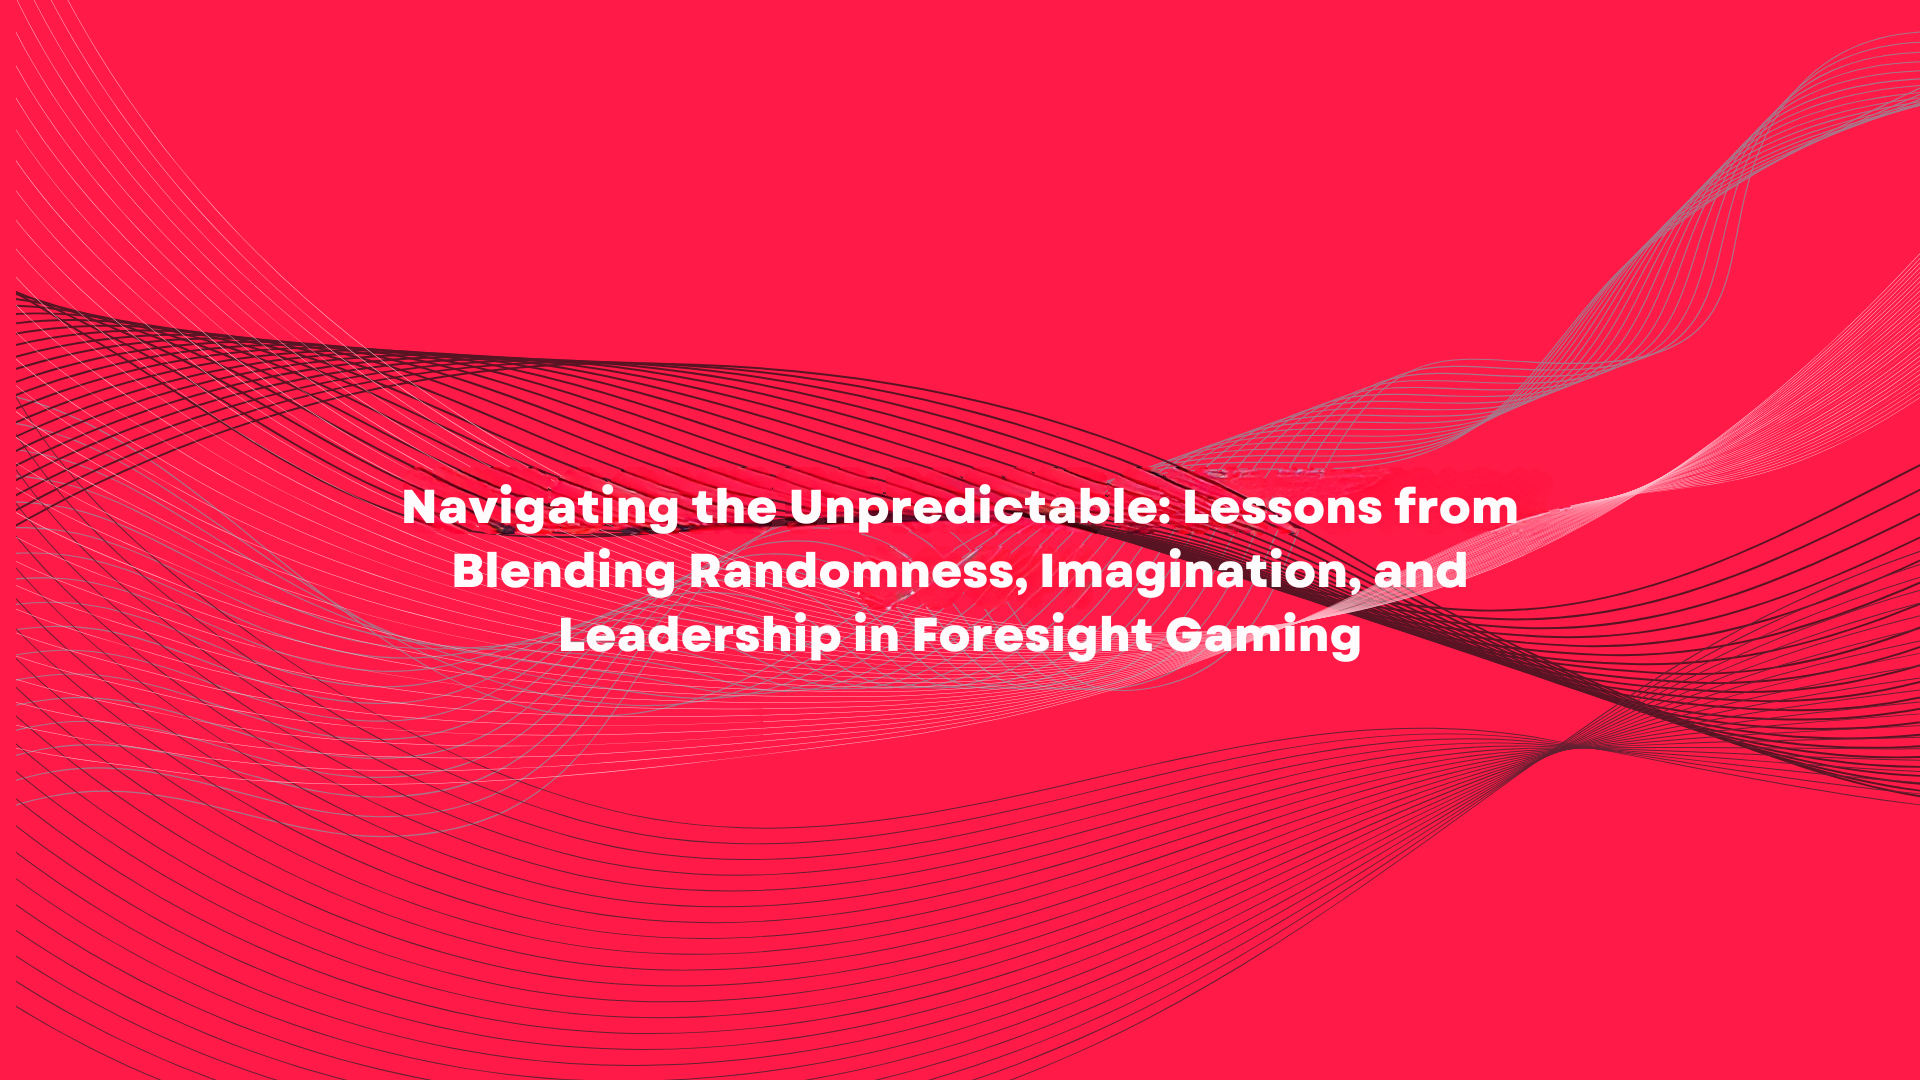 Navigating the Unpredictable: Lessons from Blending Randomness, Imagination, and Leadership in Foresight Gaming